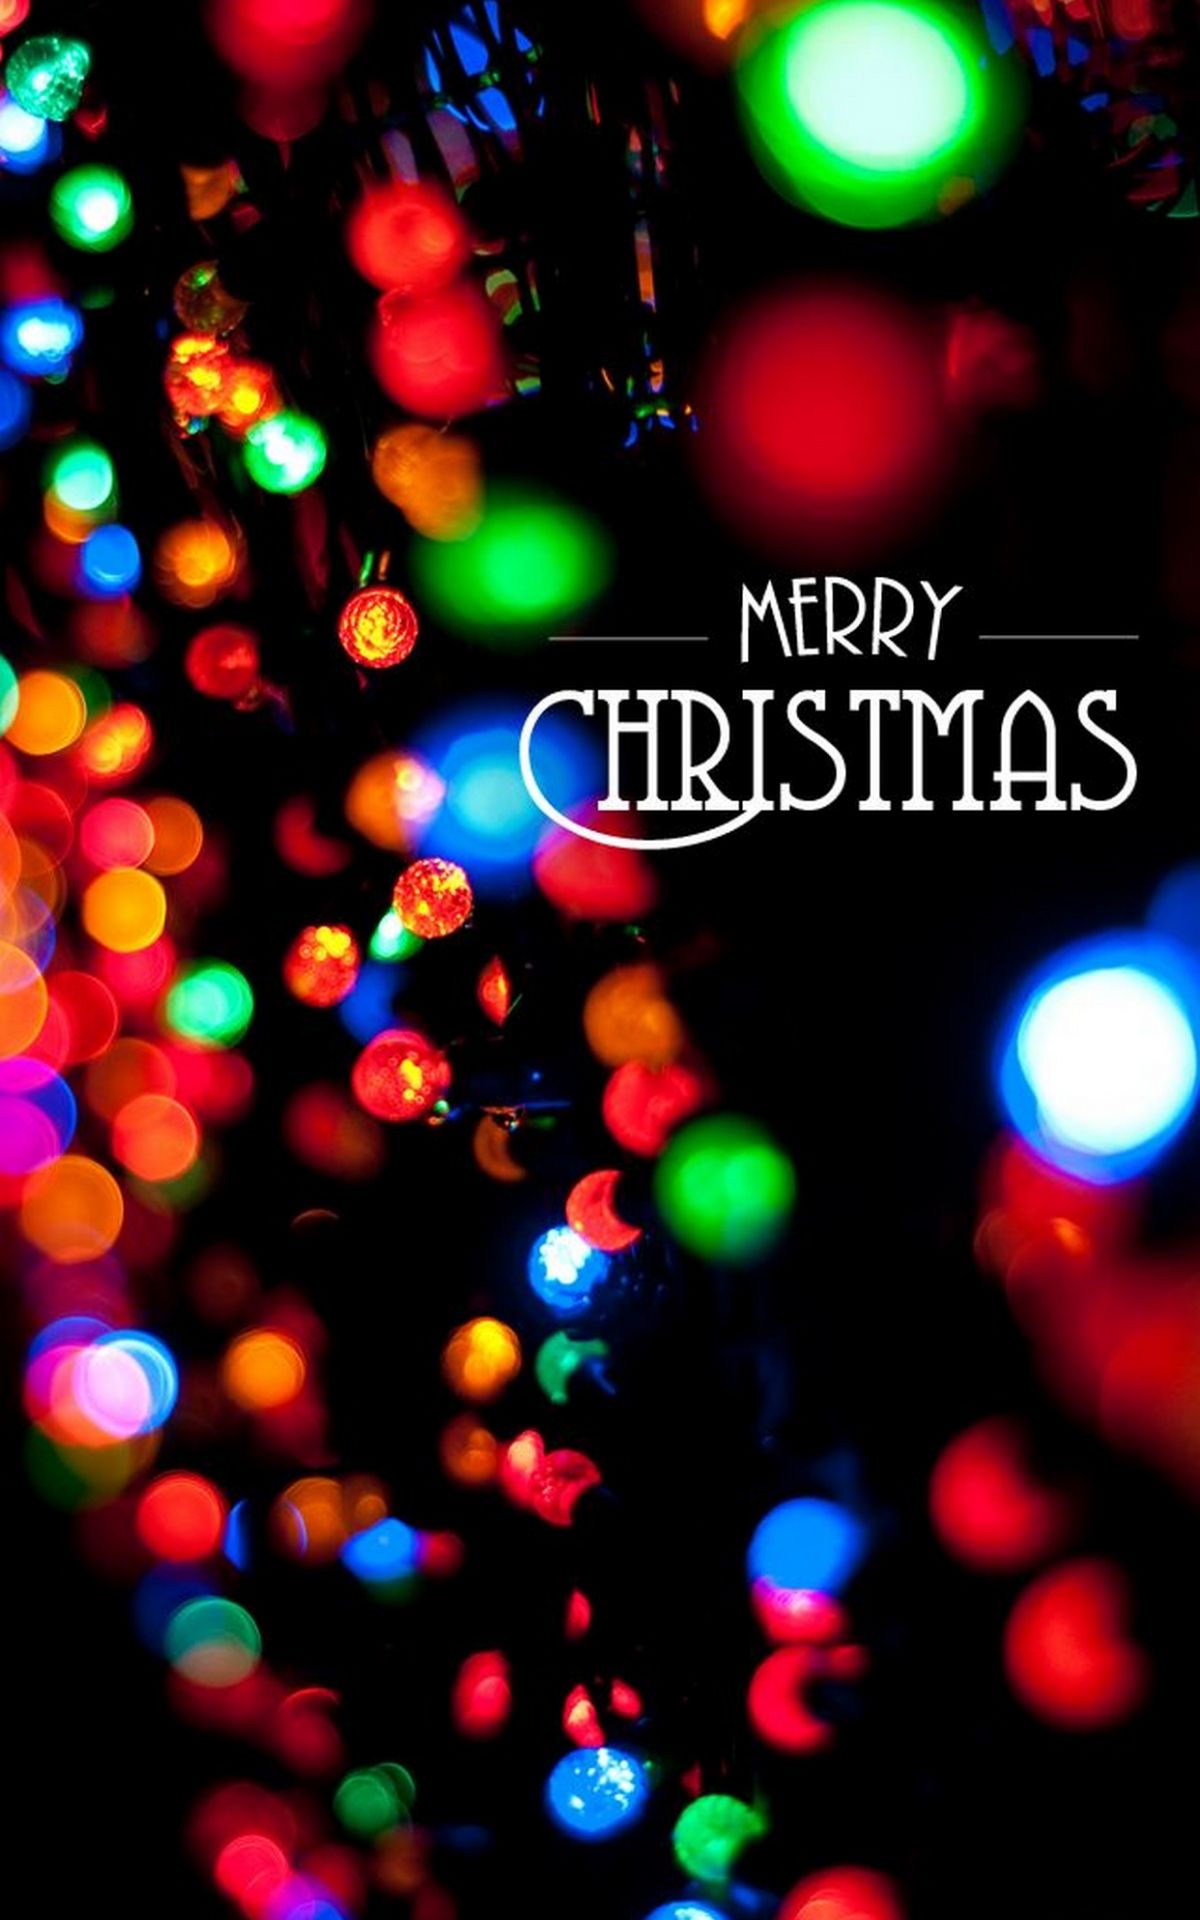 Free download 32 Christmas Wallpaper for iPhones [1242x2208] for your Desktop, Mobile & Tablet. Explore iPhone 7 Plus Christmas Wallpaper. iPhone 7 Plus Christmas Wallpaper, iPhone 7 Plus Wallpaper, IPhone 7 Plus Wallpaper